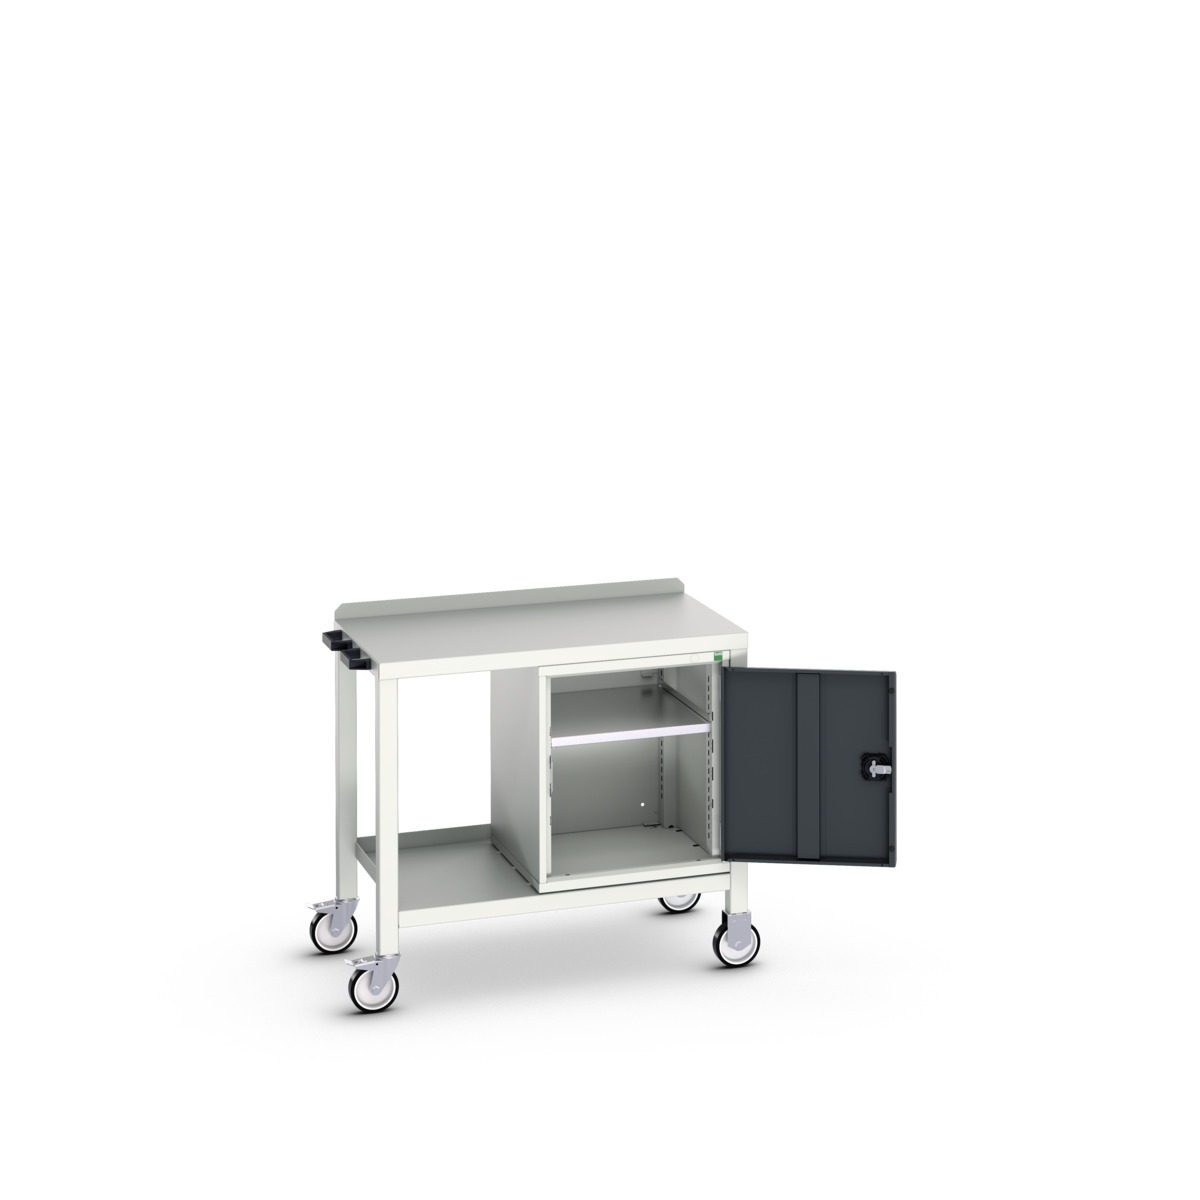 16922802.19 - verso mobile welded bench